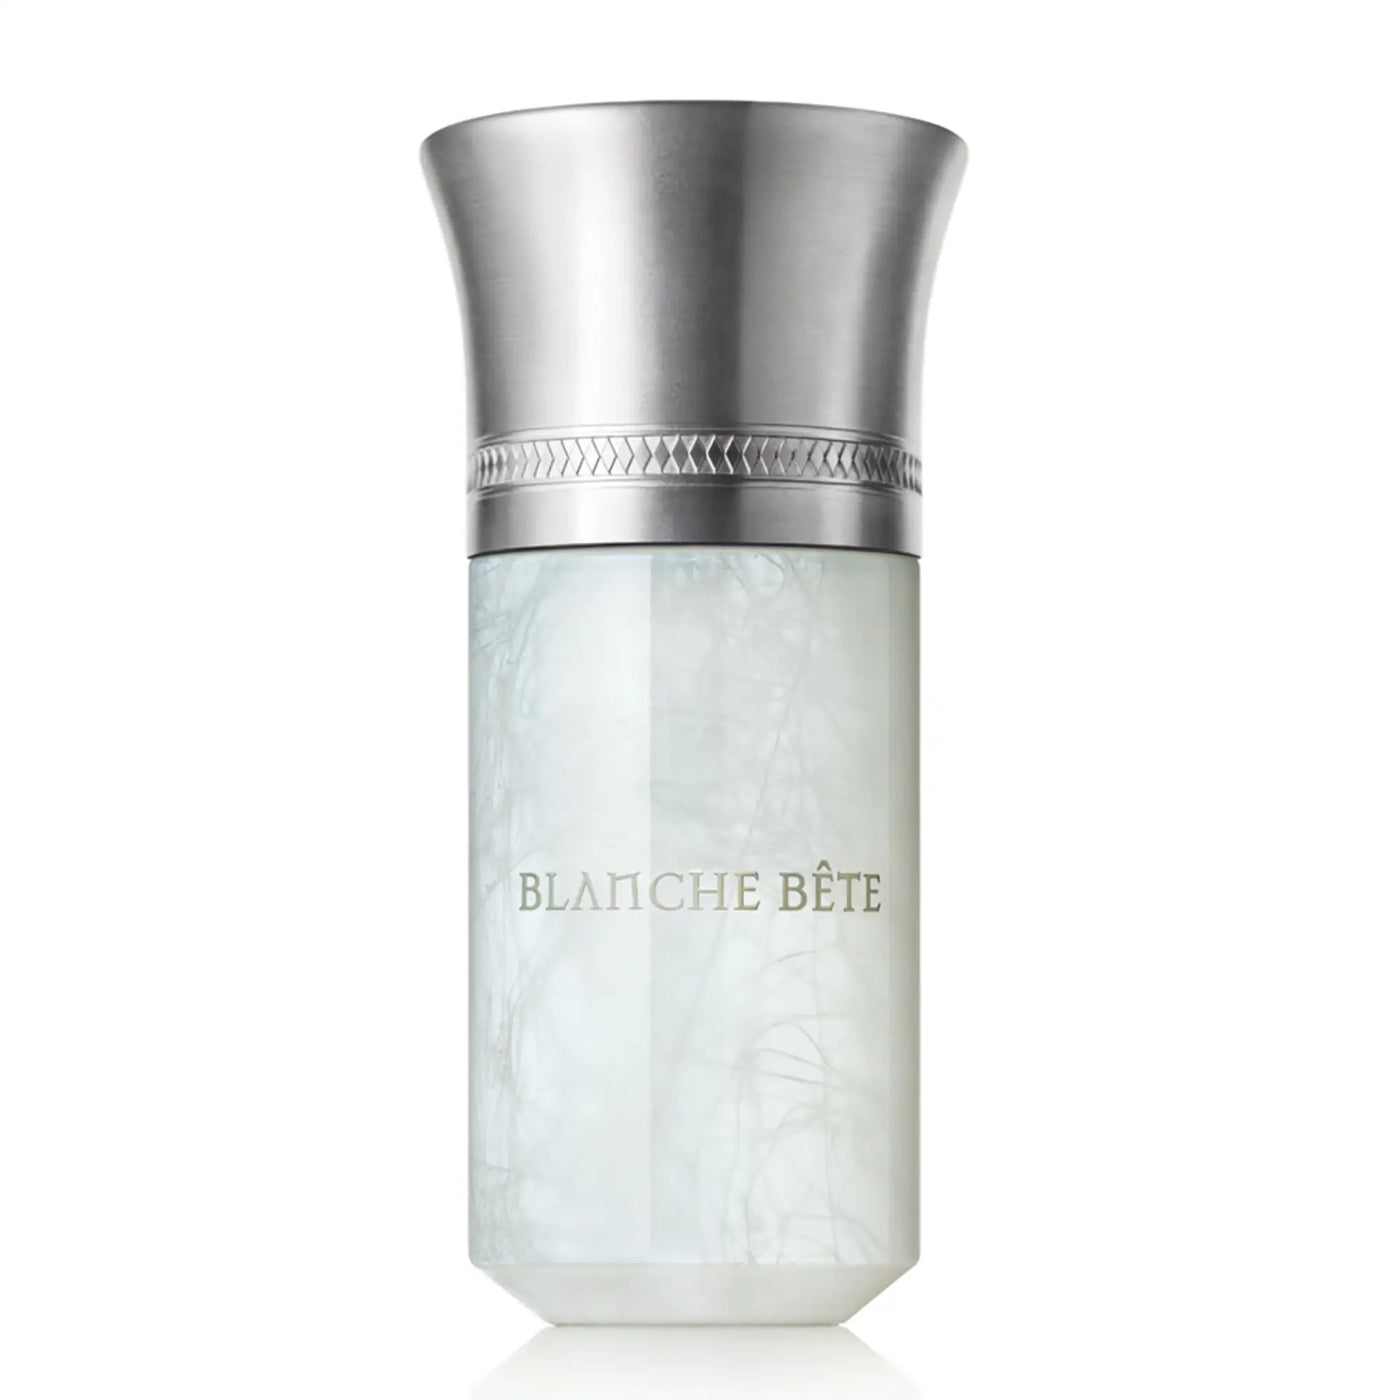 Liquides Imaginaires Blanche Bête - 100ml - Gharyal by Collectibles 